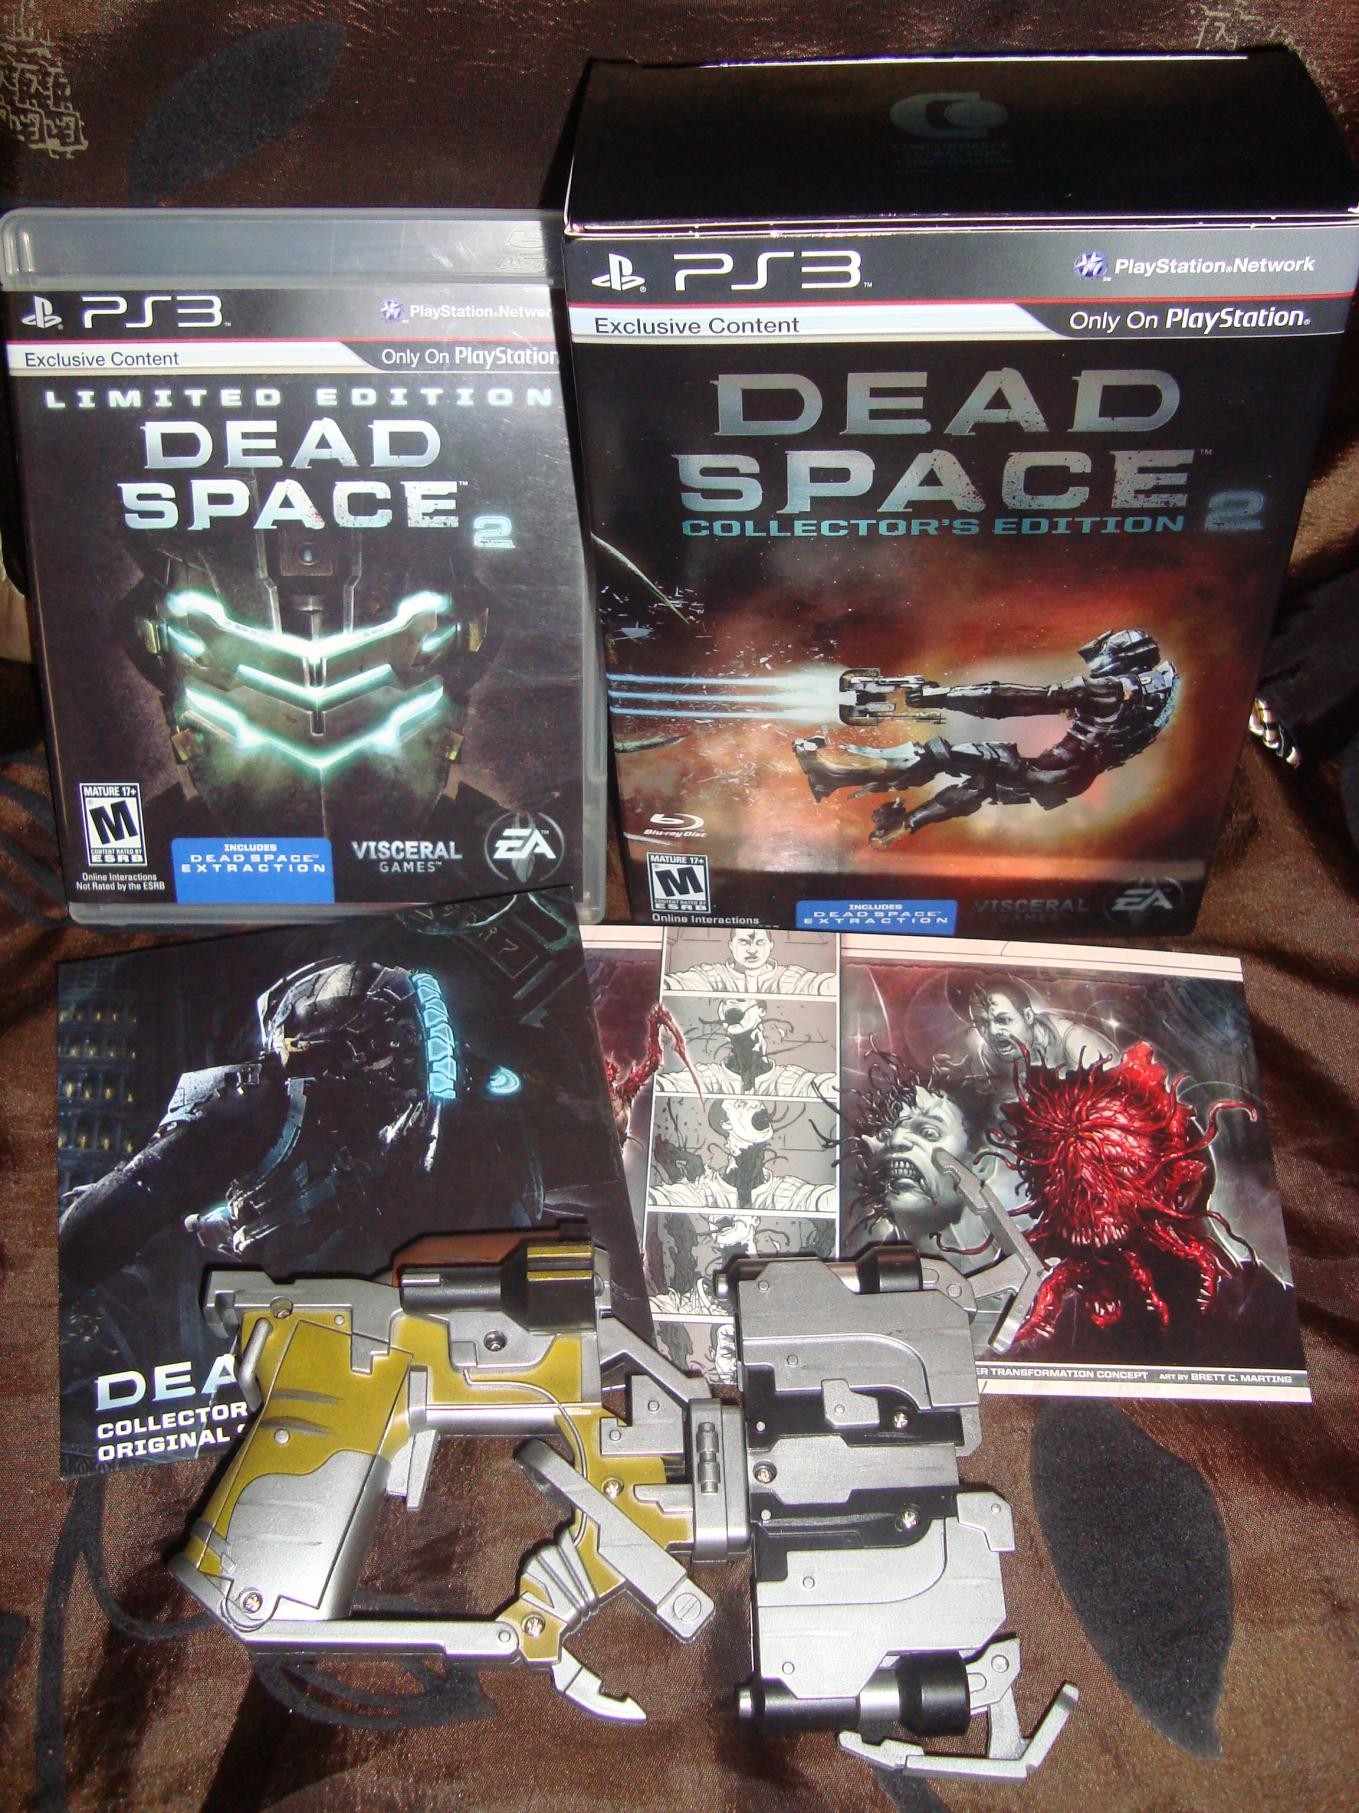 20. Dead Space 2